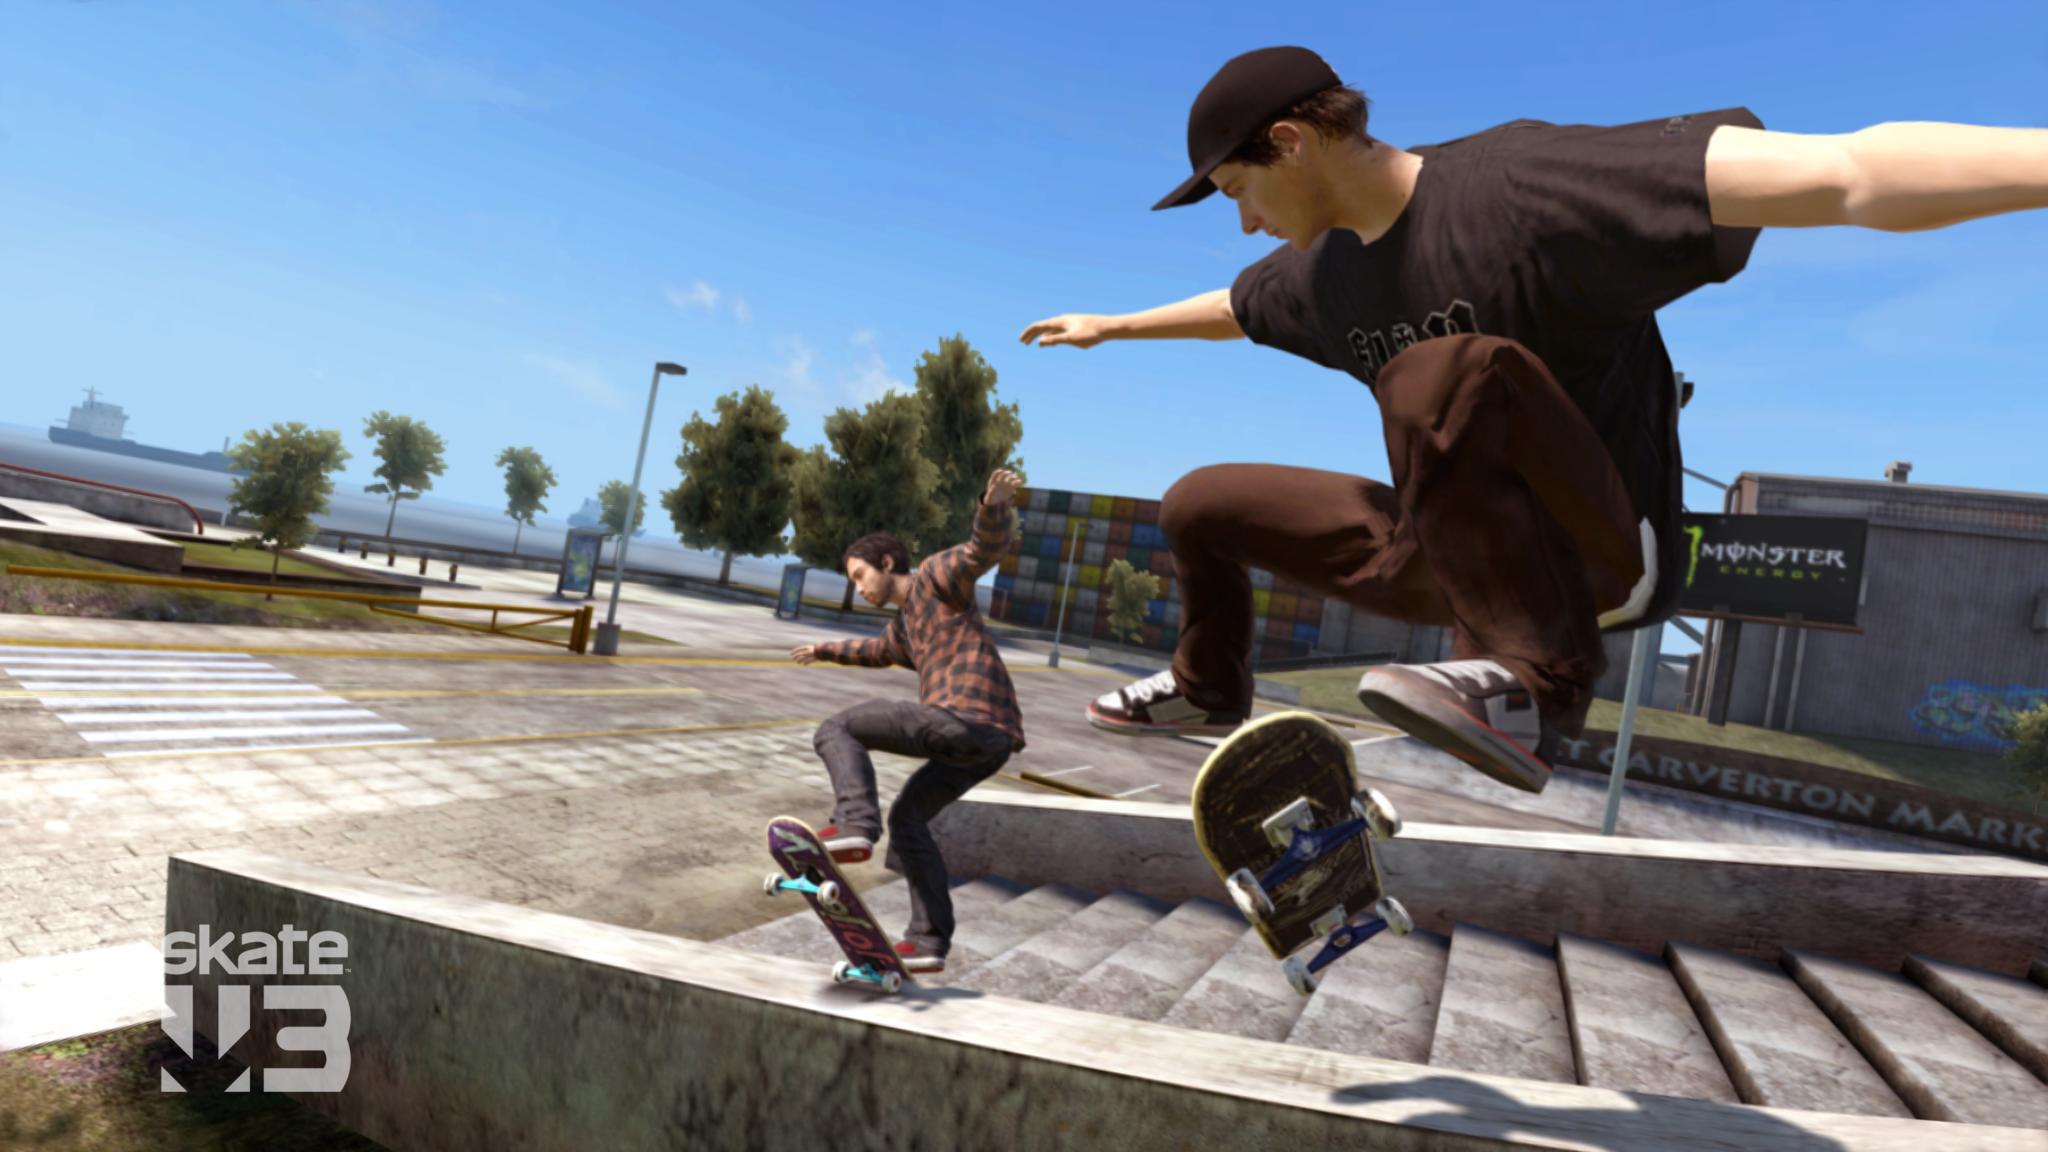 skate 3 xbox one stuck updating reports